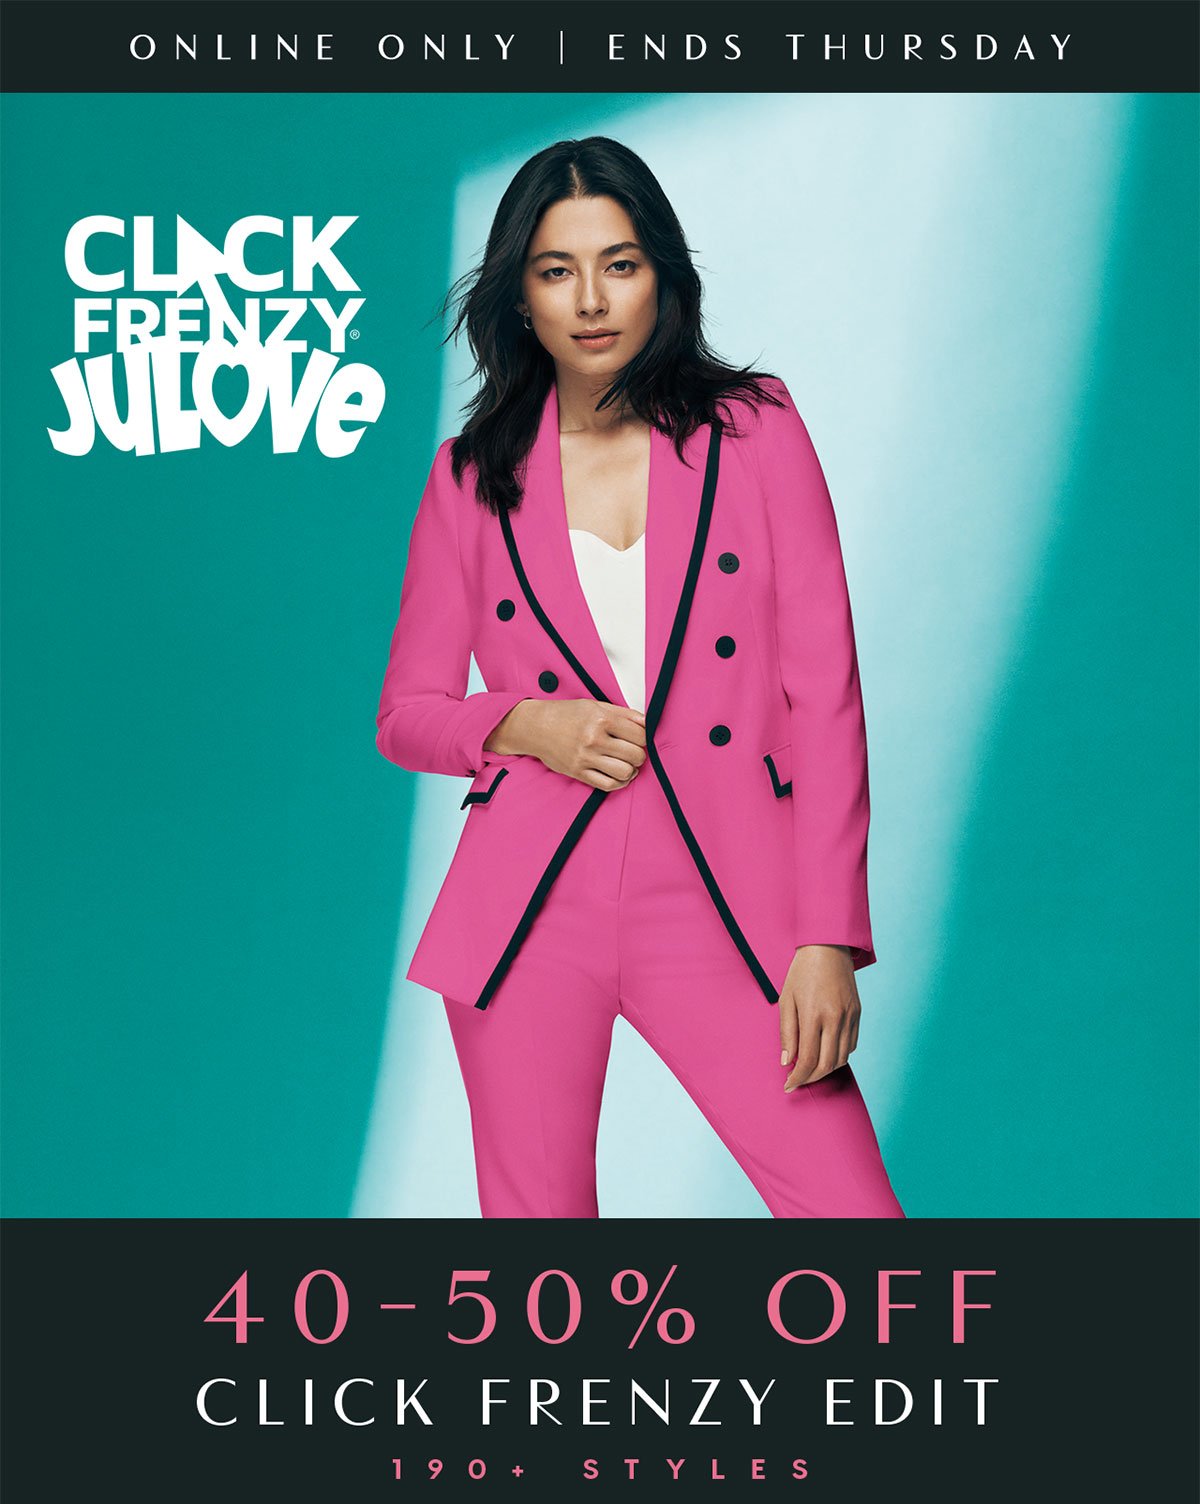 Online Only. Click Frenzy JuLove. 40-50% Off Click Frenzy Edit. 190+ Styles.